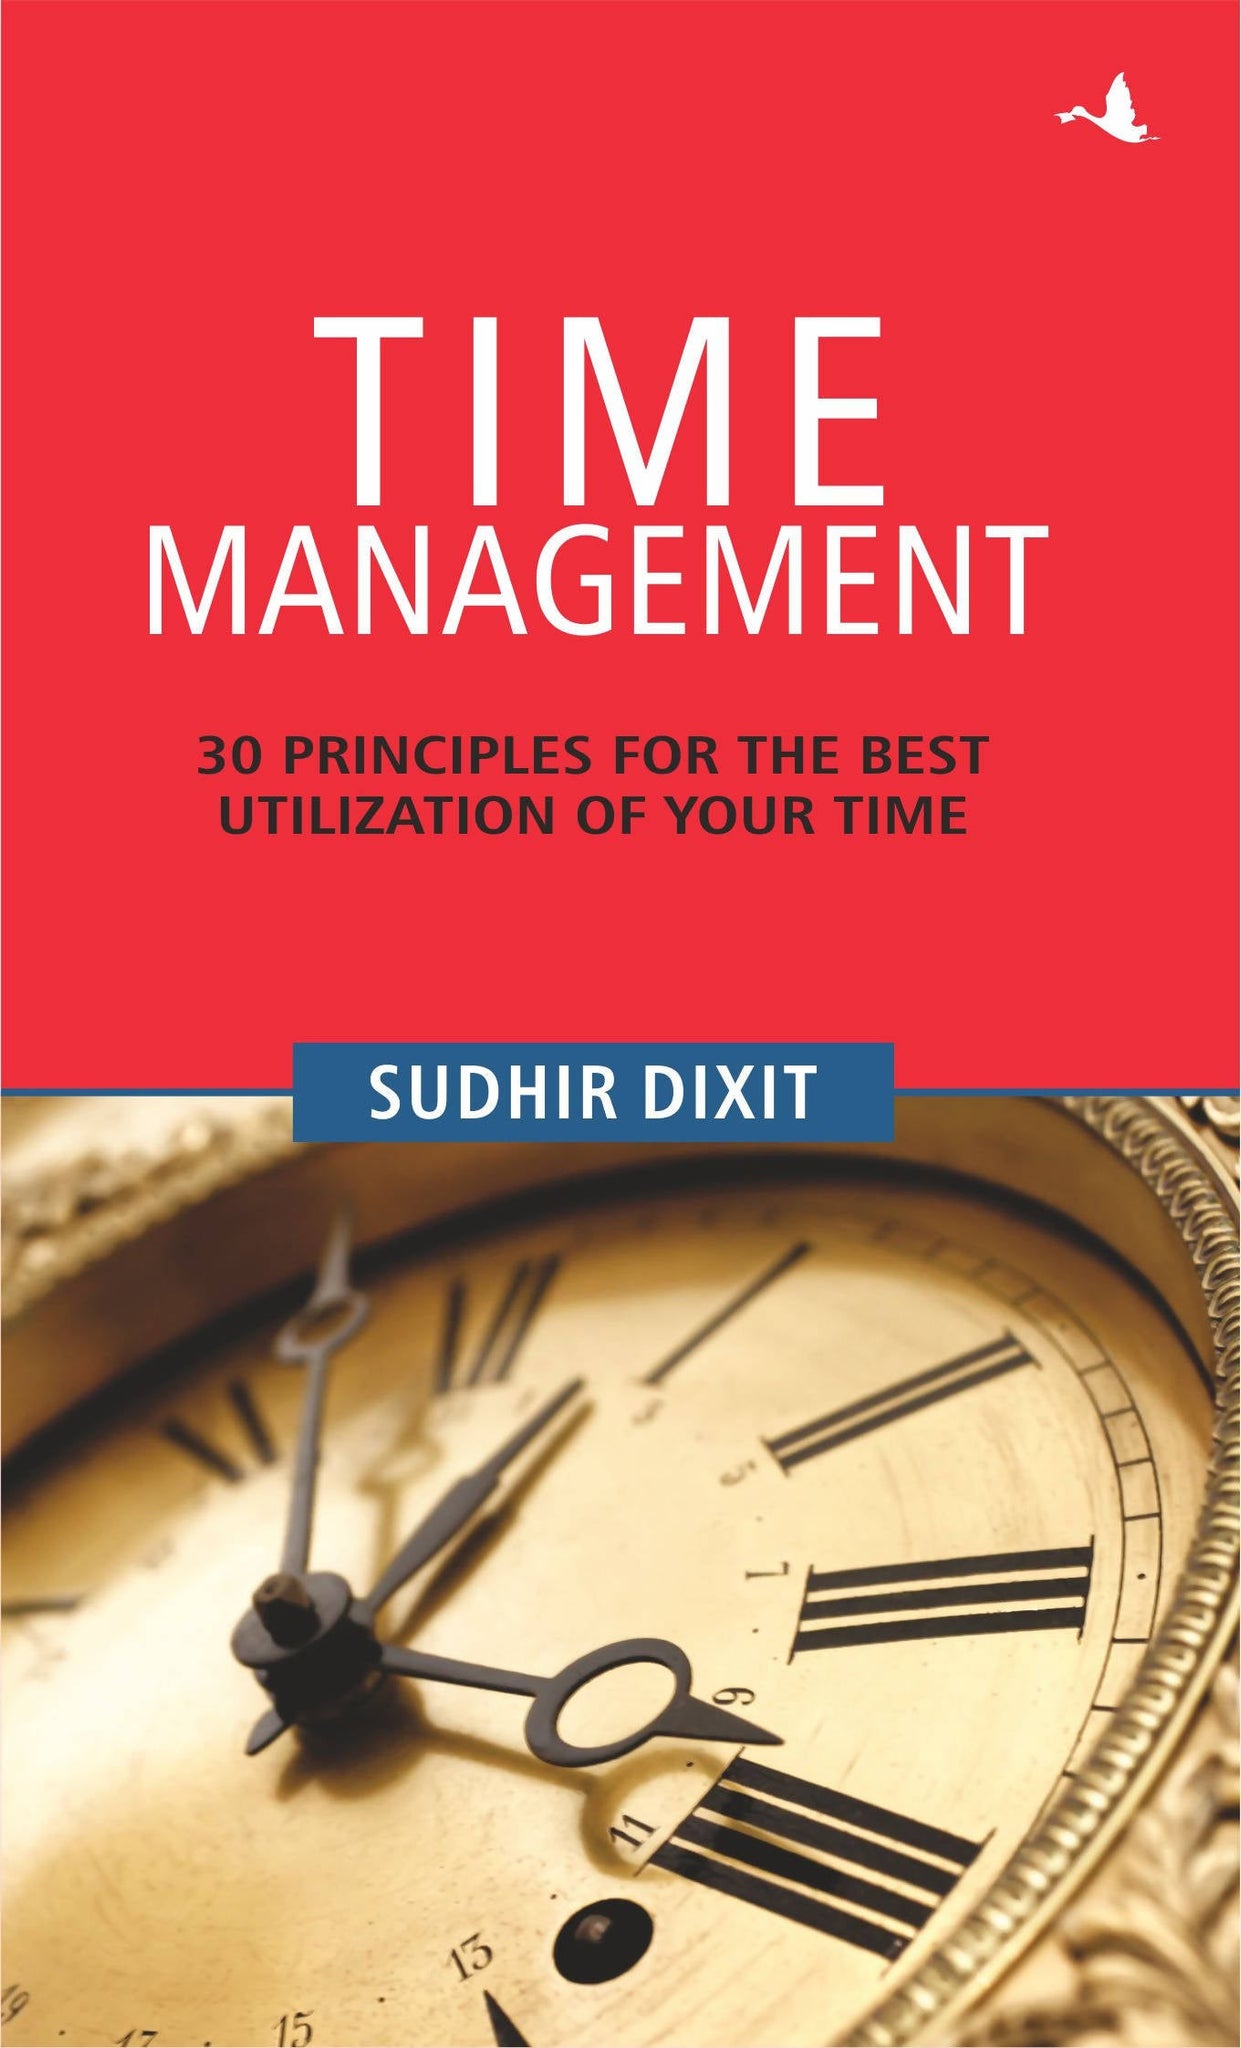 Time Management: 30 Principles for the Best Utilization of Your Time